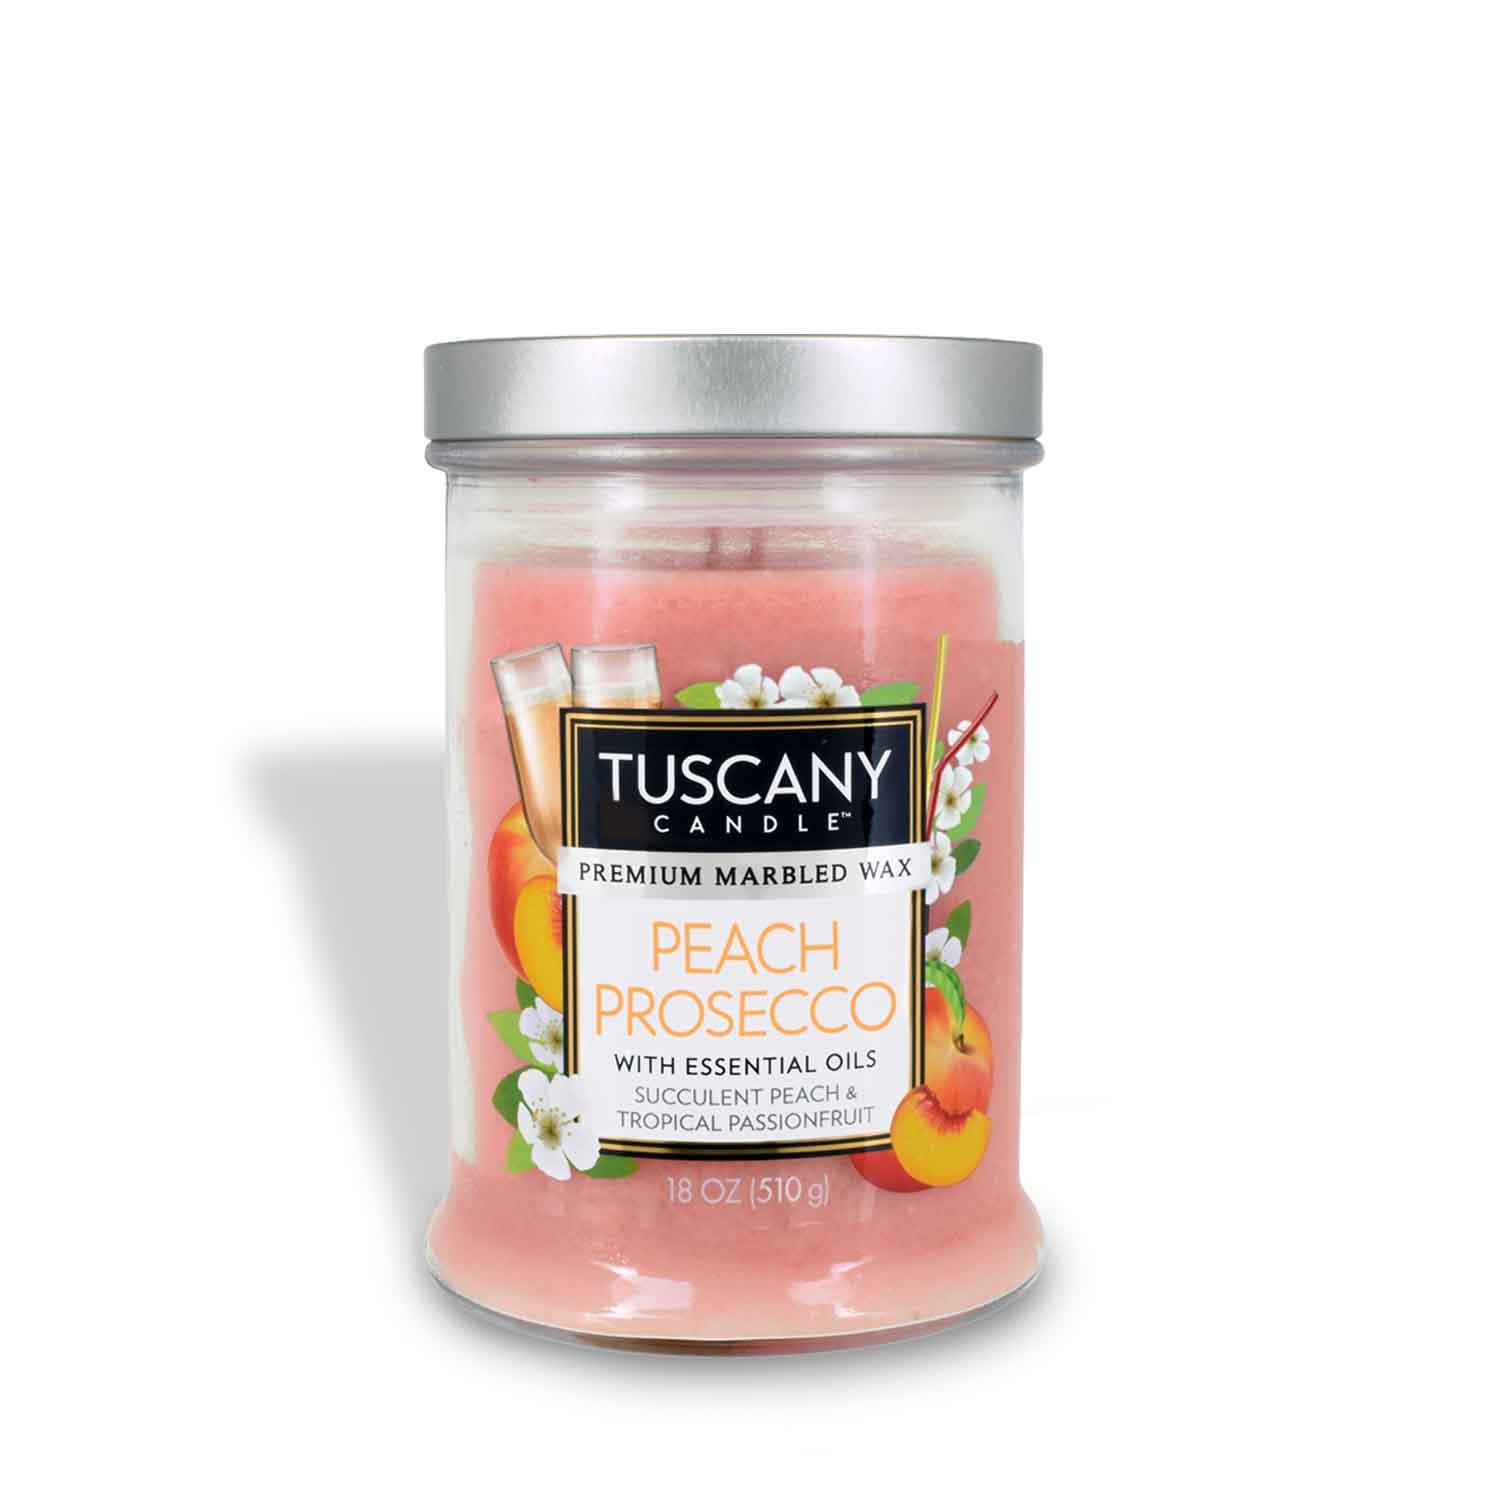 Bath & Body Works Champagne Toast 3 Wick Fruit Scented Candle - Peach